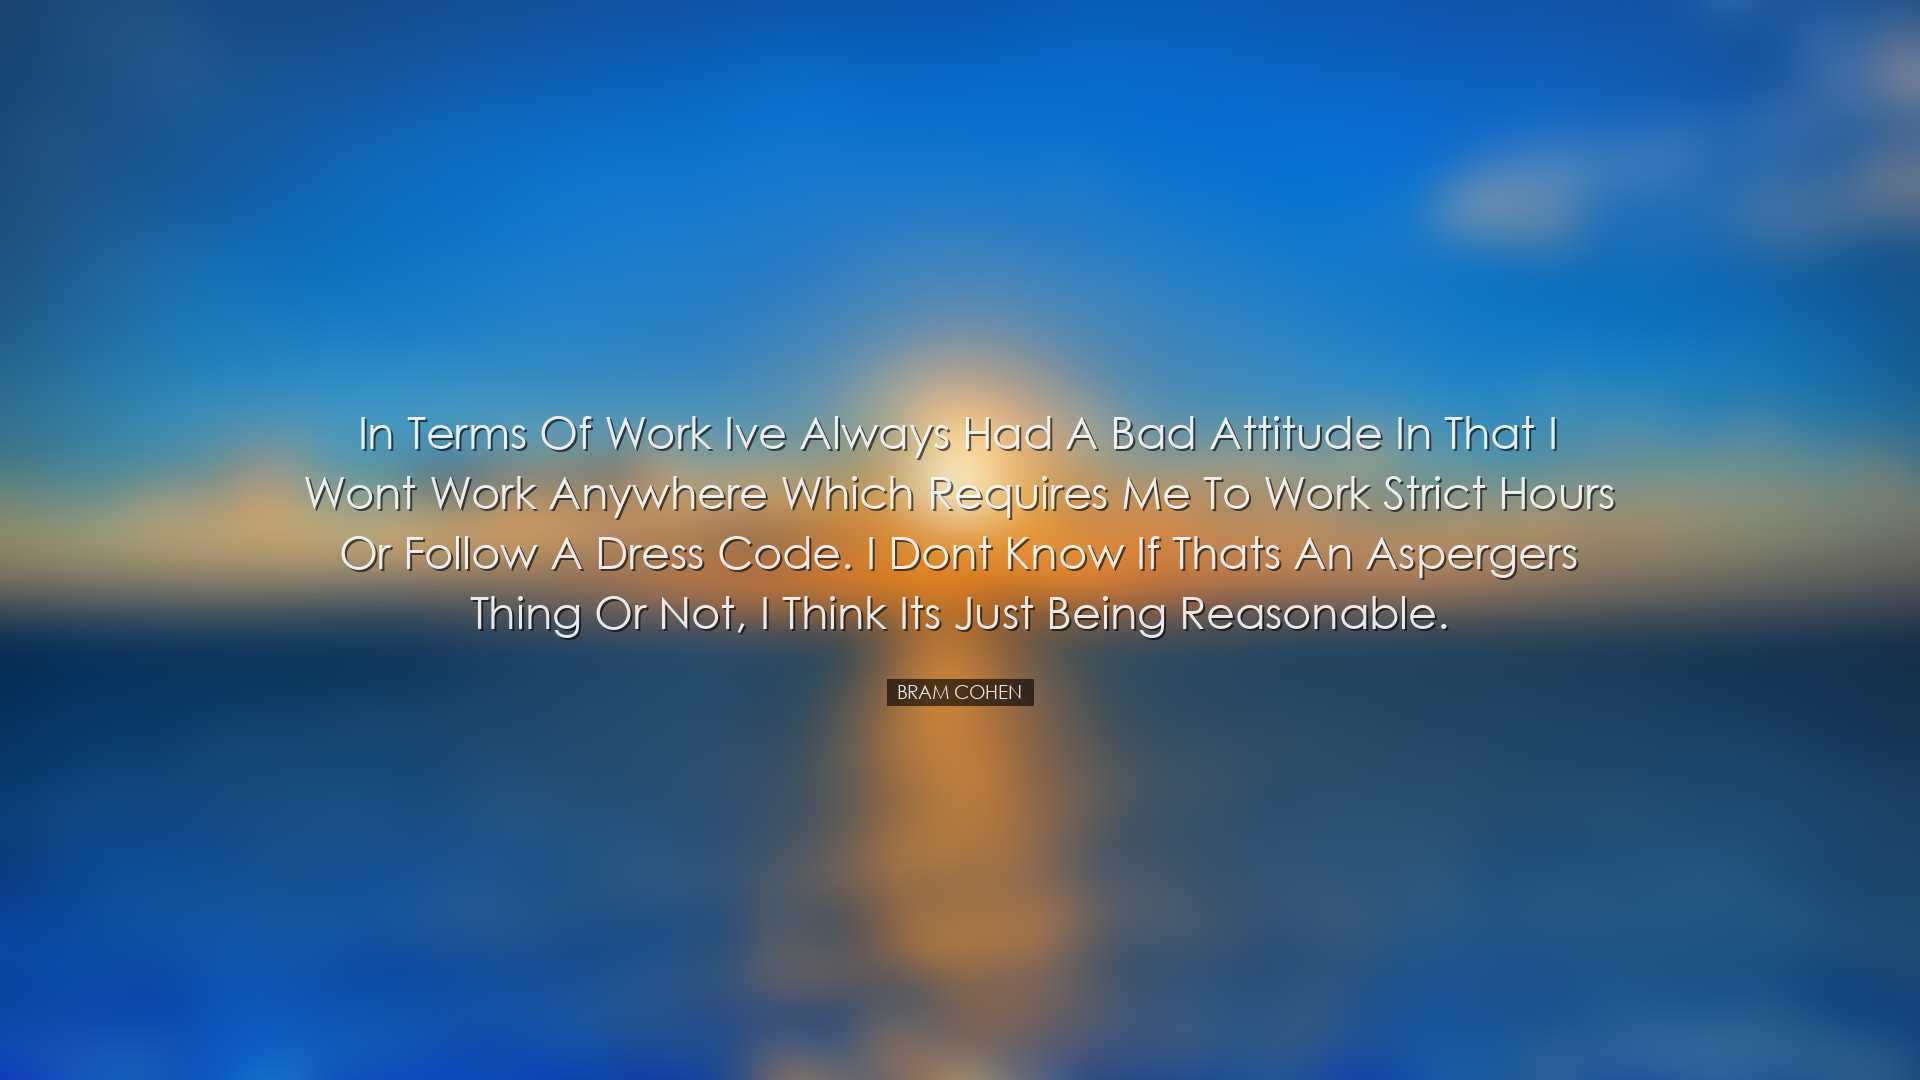 In terms of work Ive always had a Bad Attitude in that I wont work